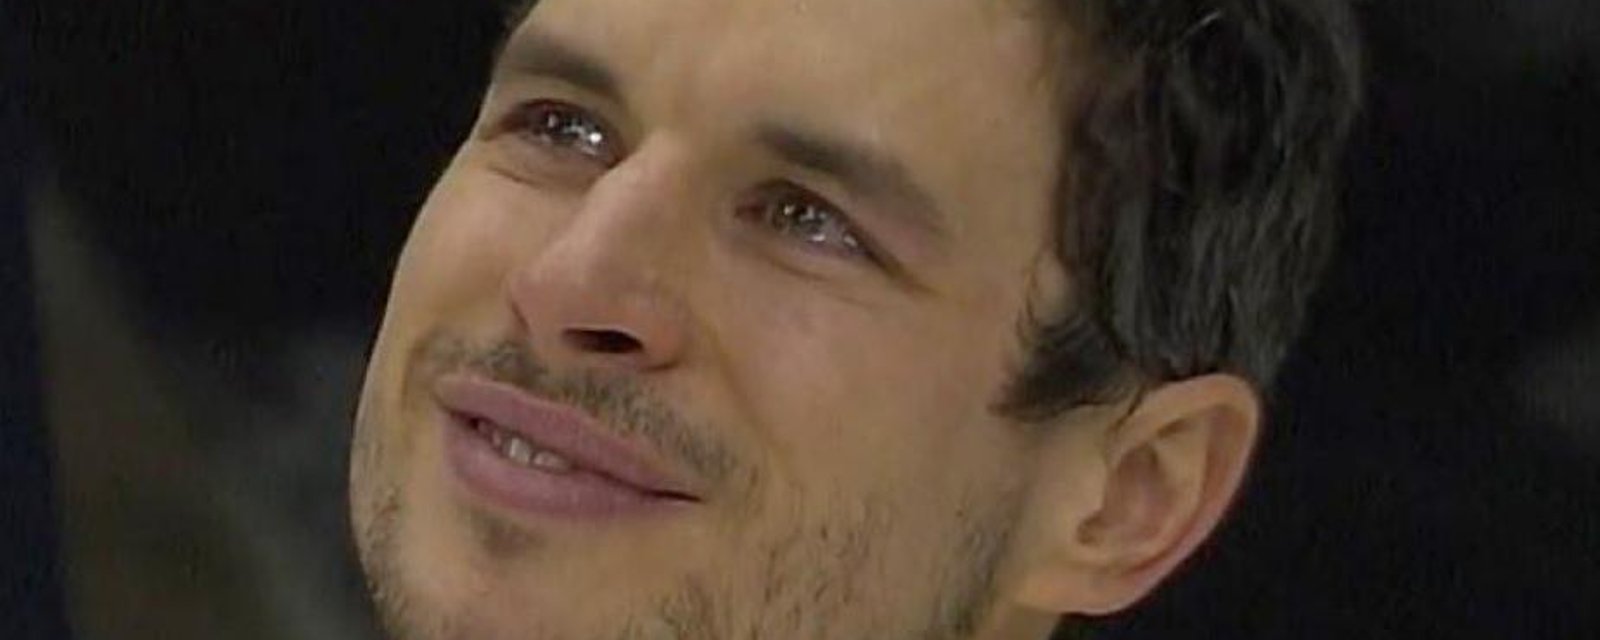 ICYMI: Crosby can't hold back tears during emotional tribute. 